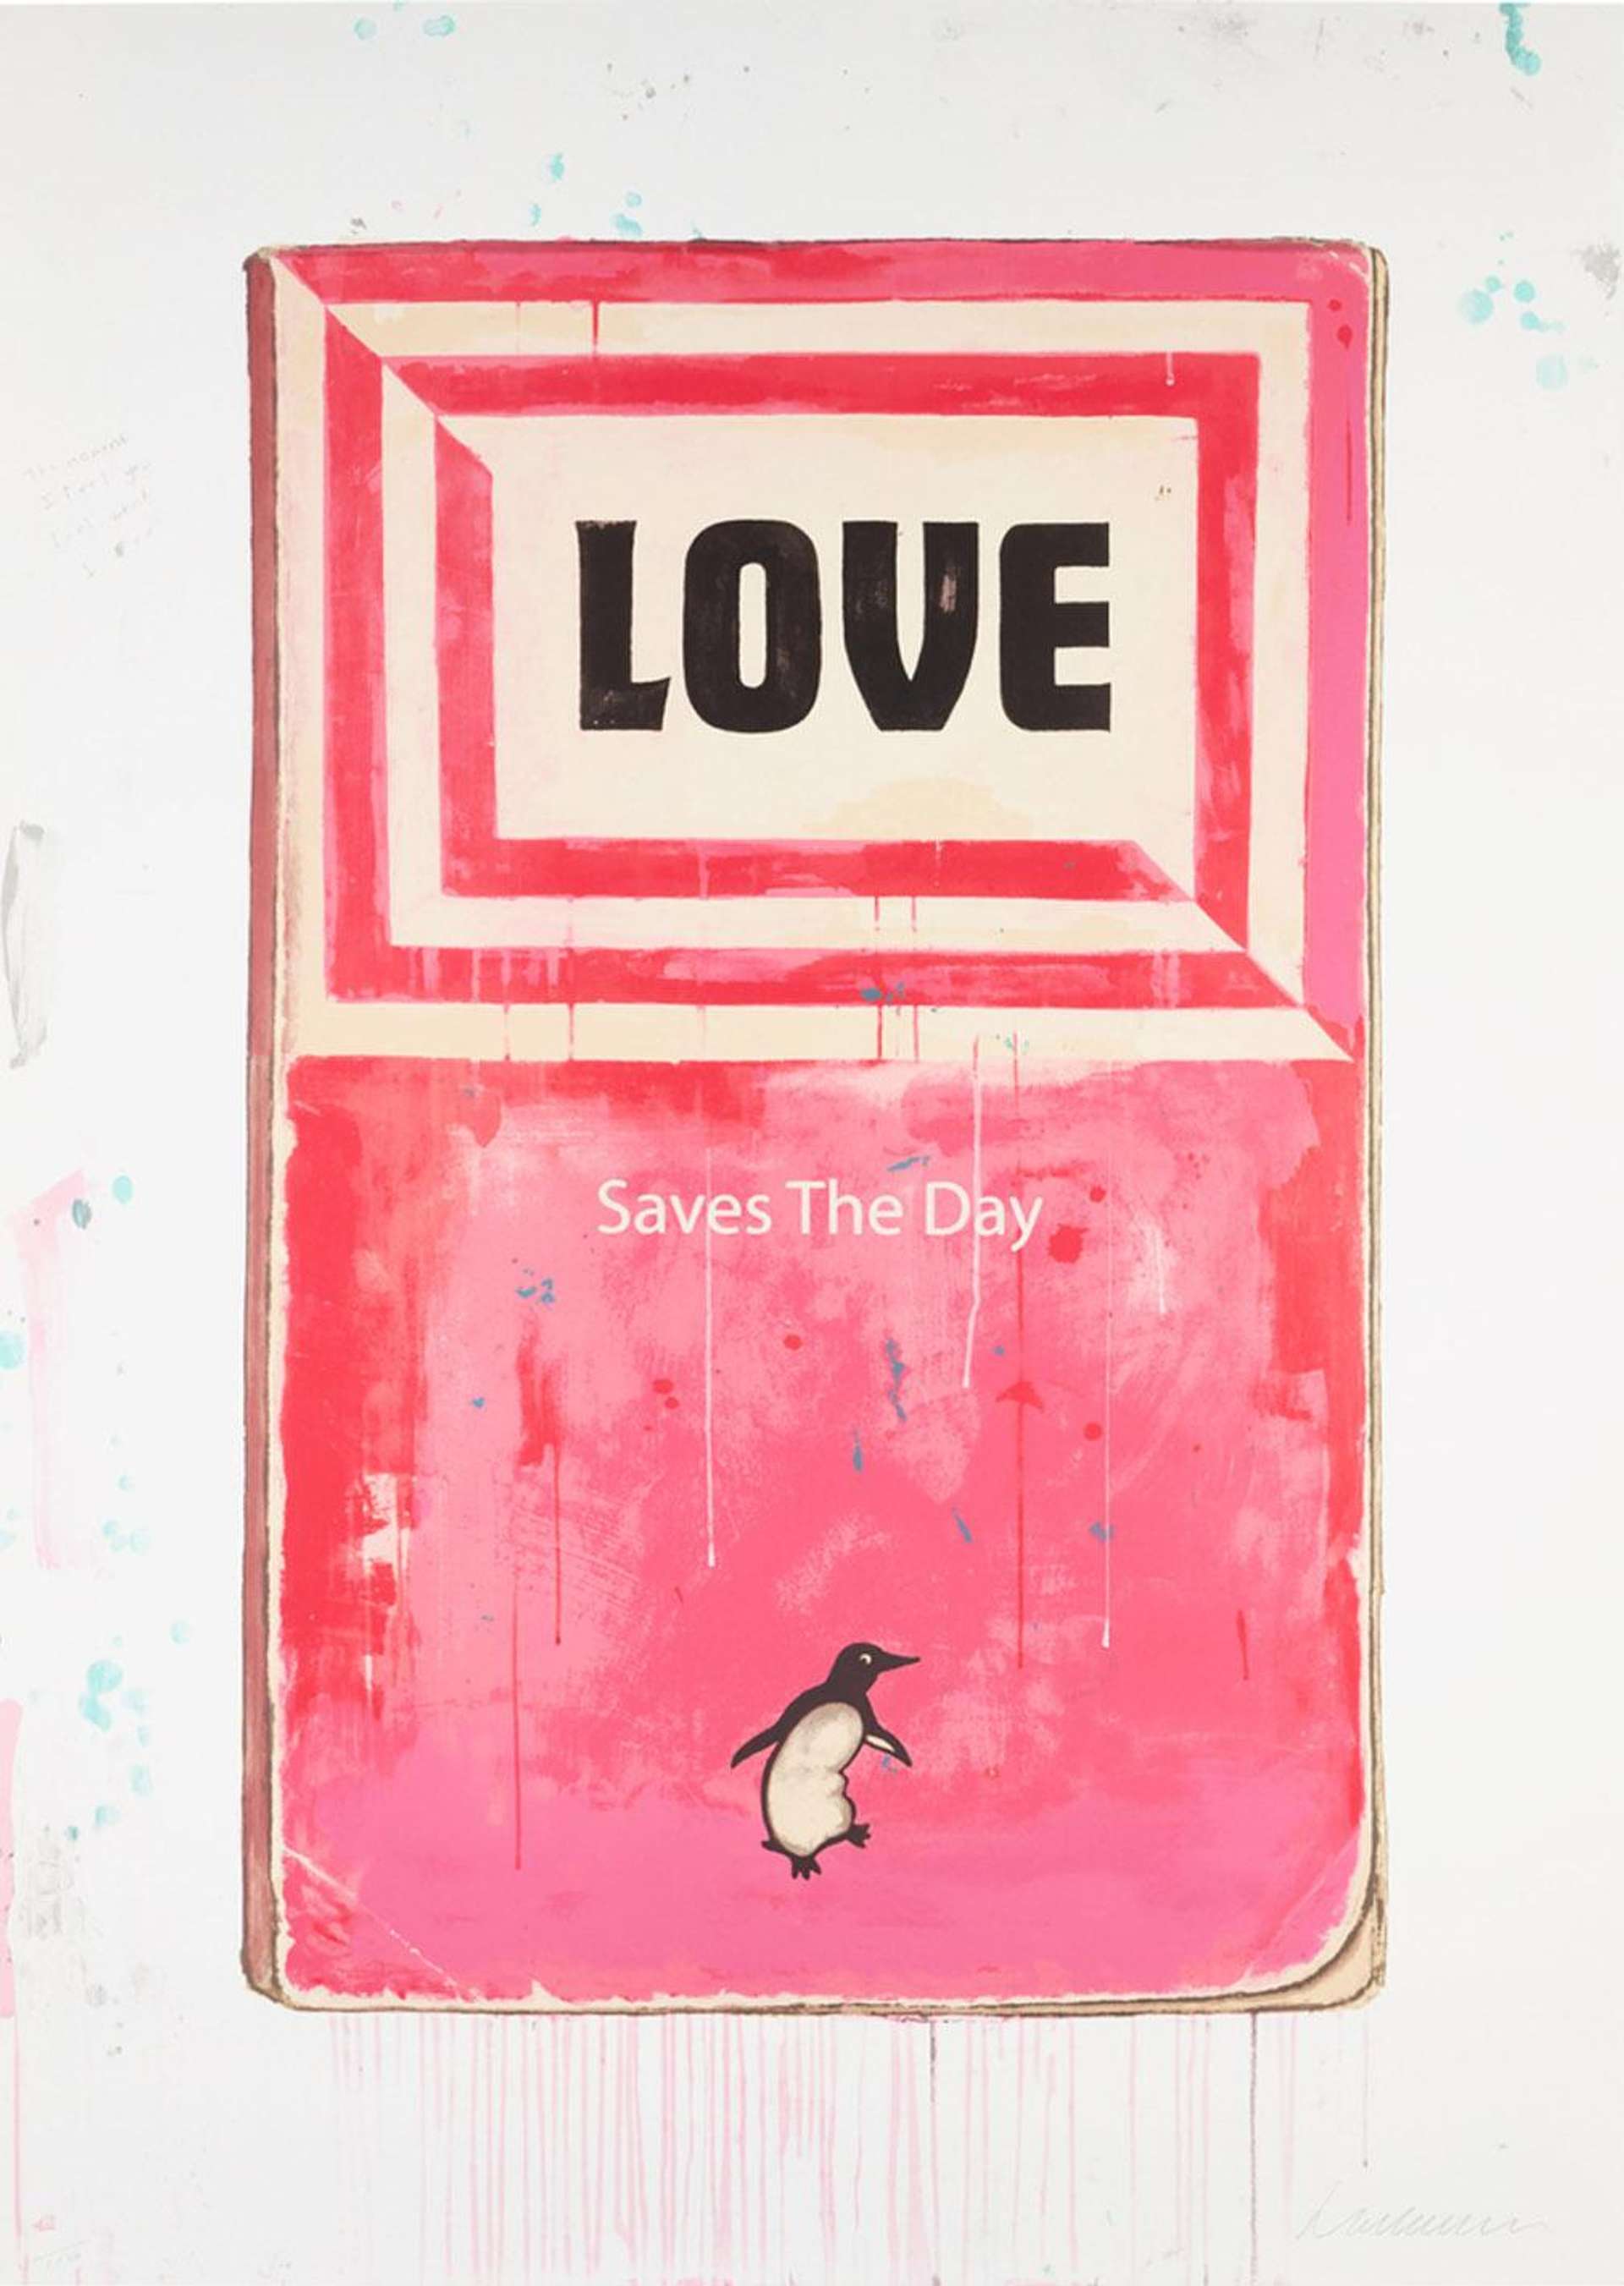 Love Saves The Day by Harland Miller - MyArtBroker 